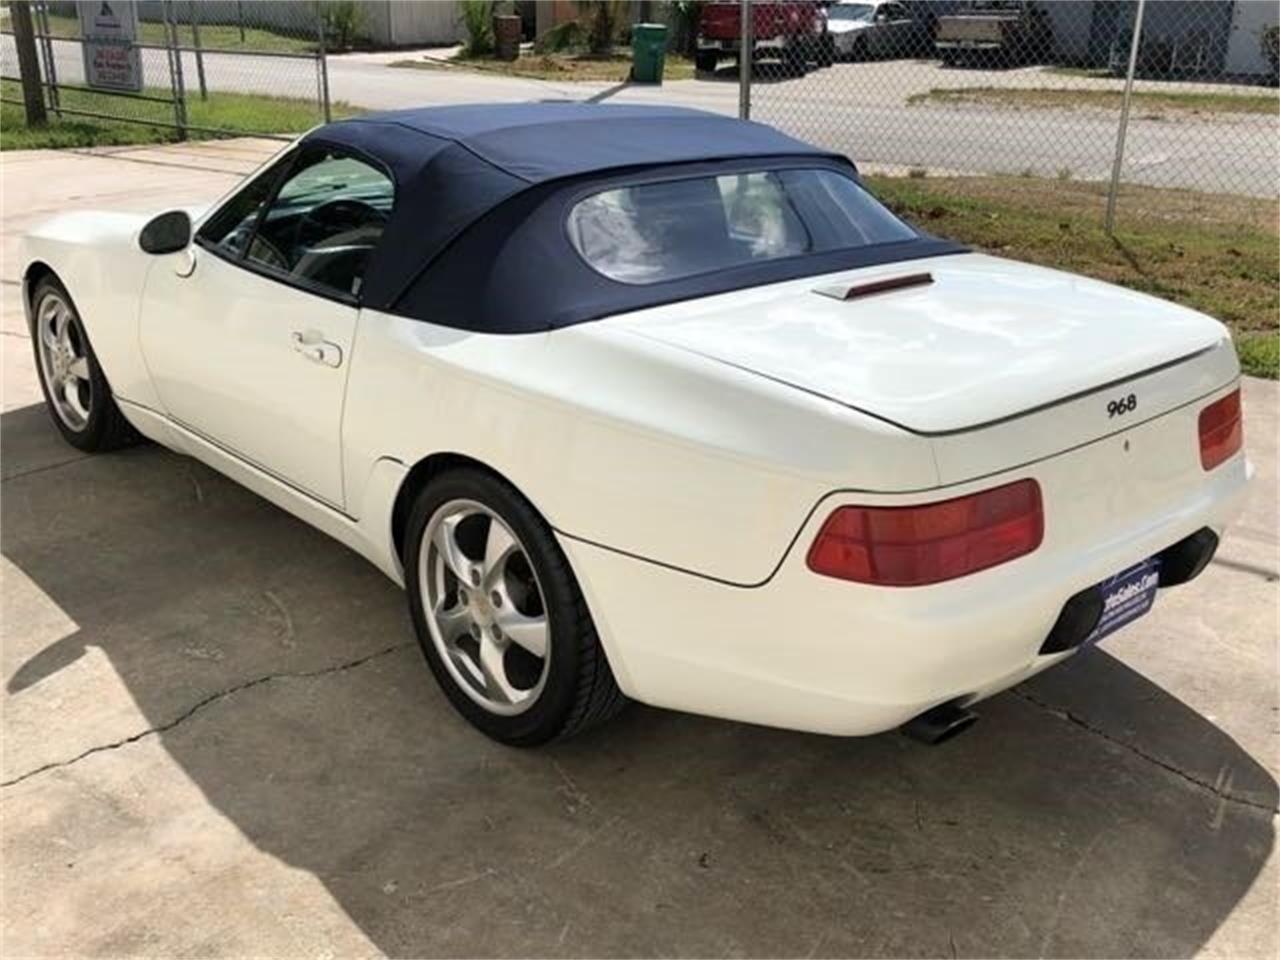 1992 Porsche 968 for sale in Holly Hill, FL – photo 40